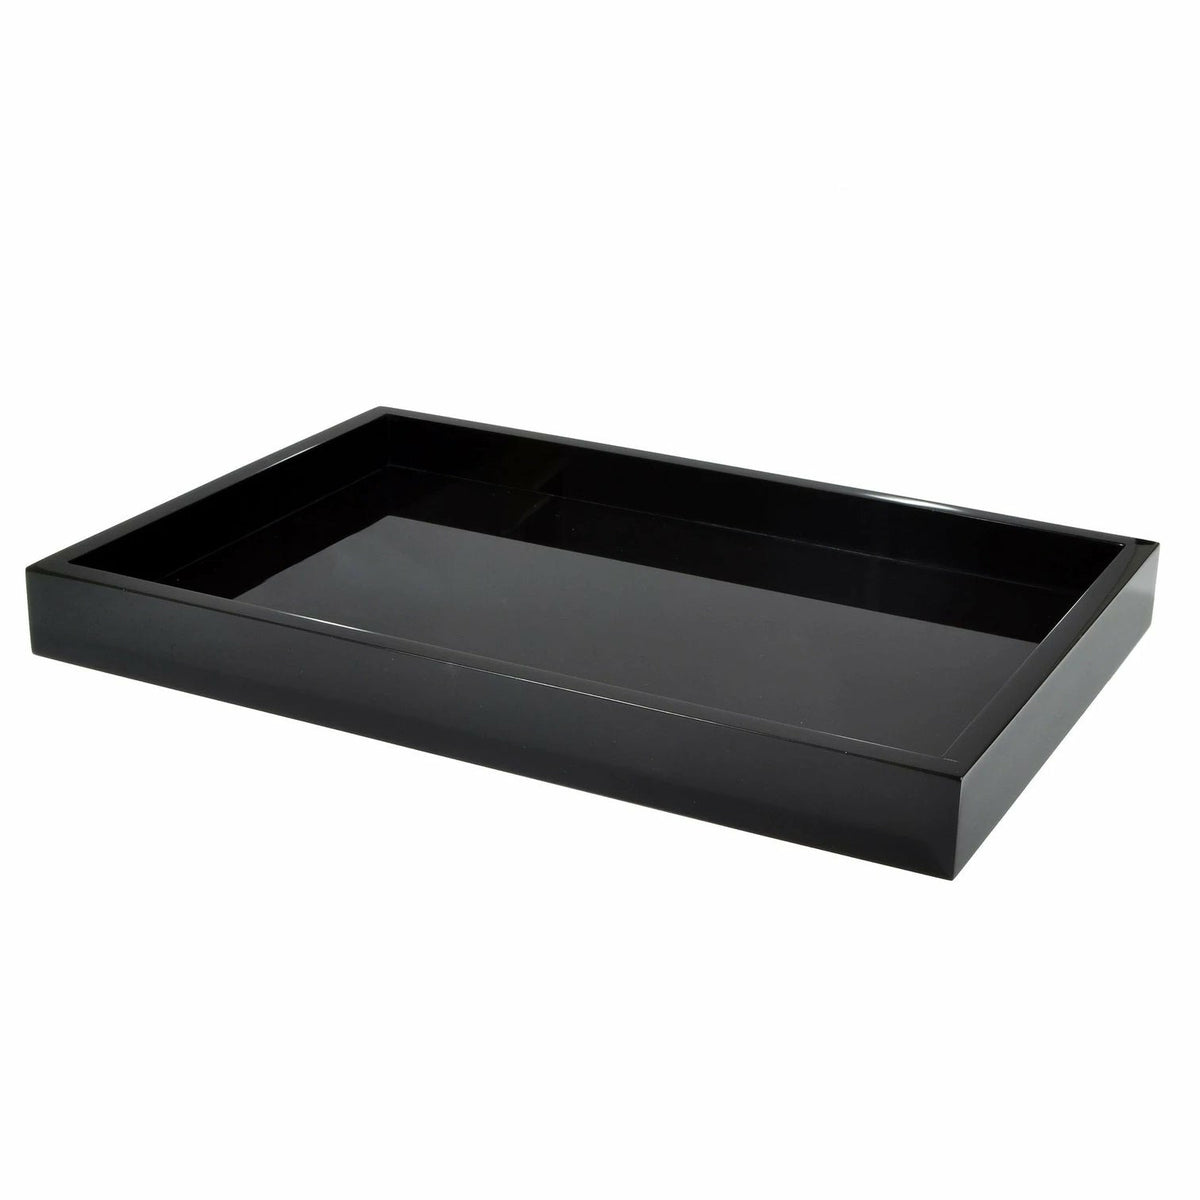 Mike and Ally Ice Lucite Bath Accessories Large Tray Black